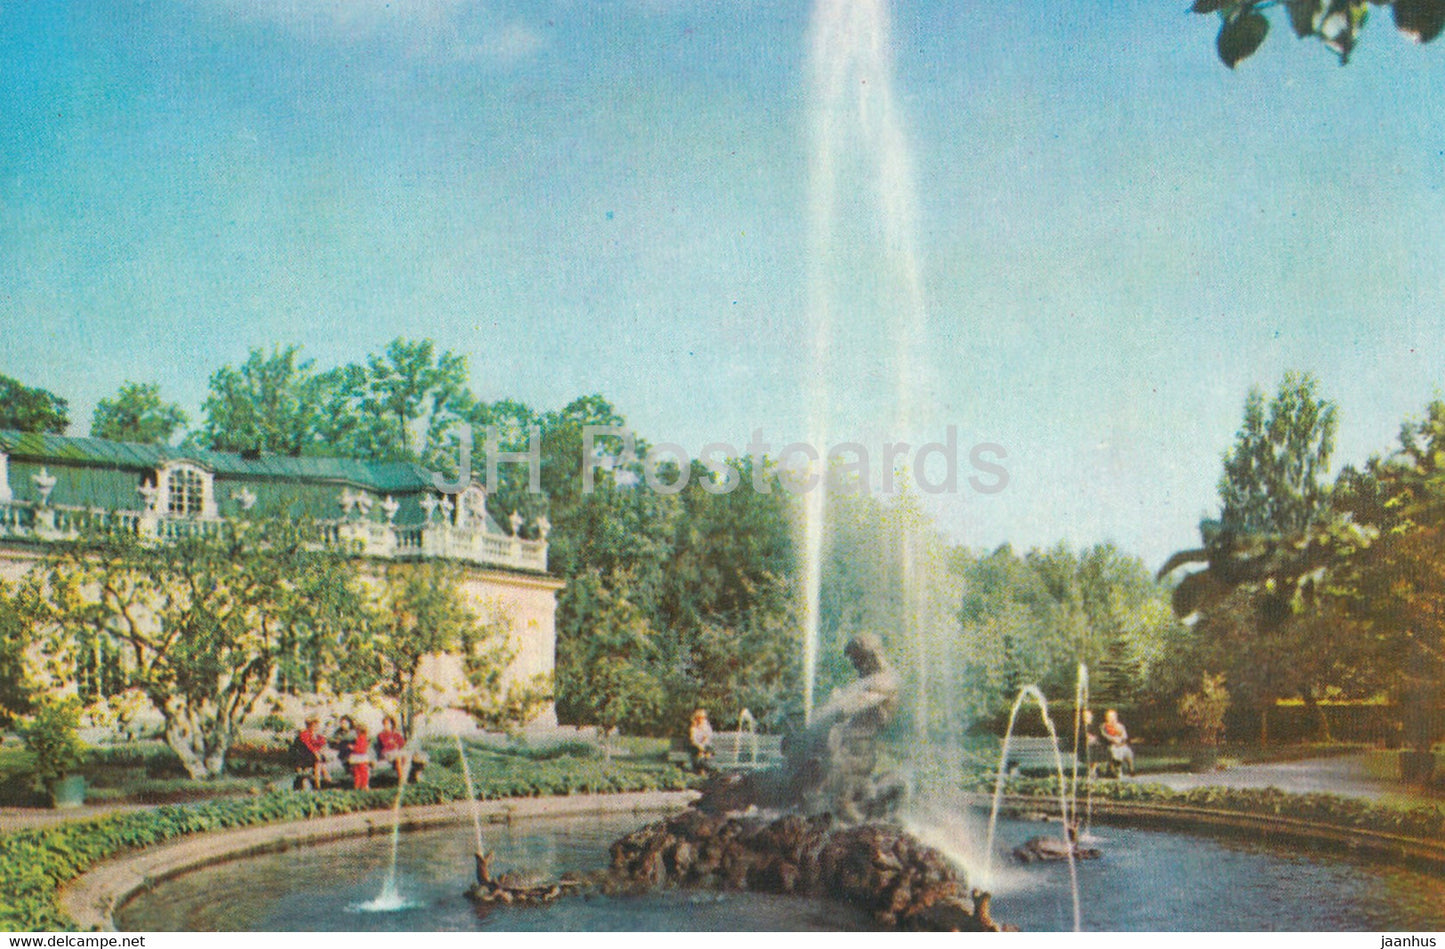 Petrodvorets - Conservatory fountain - 1966 - Russia USSR - unused - JH Postcards